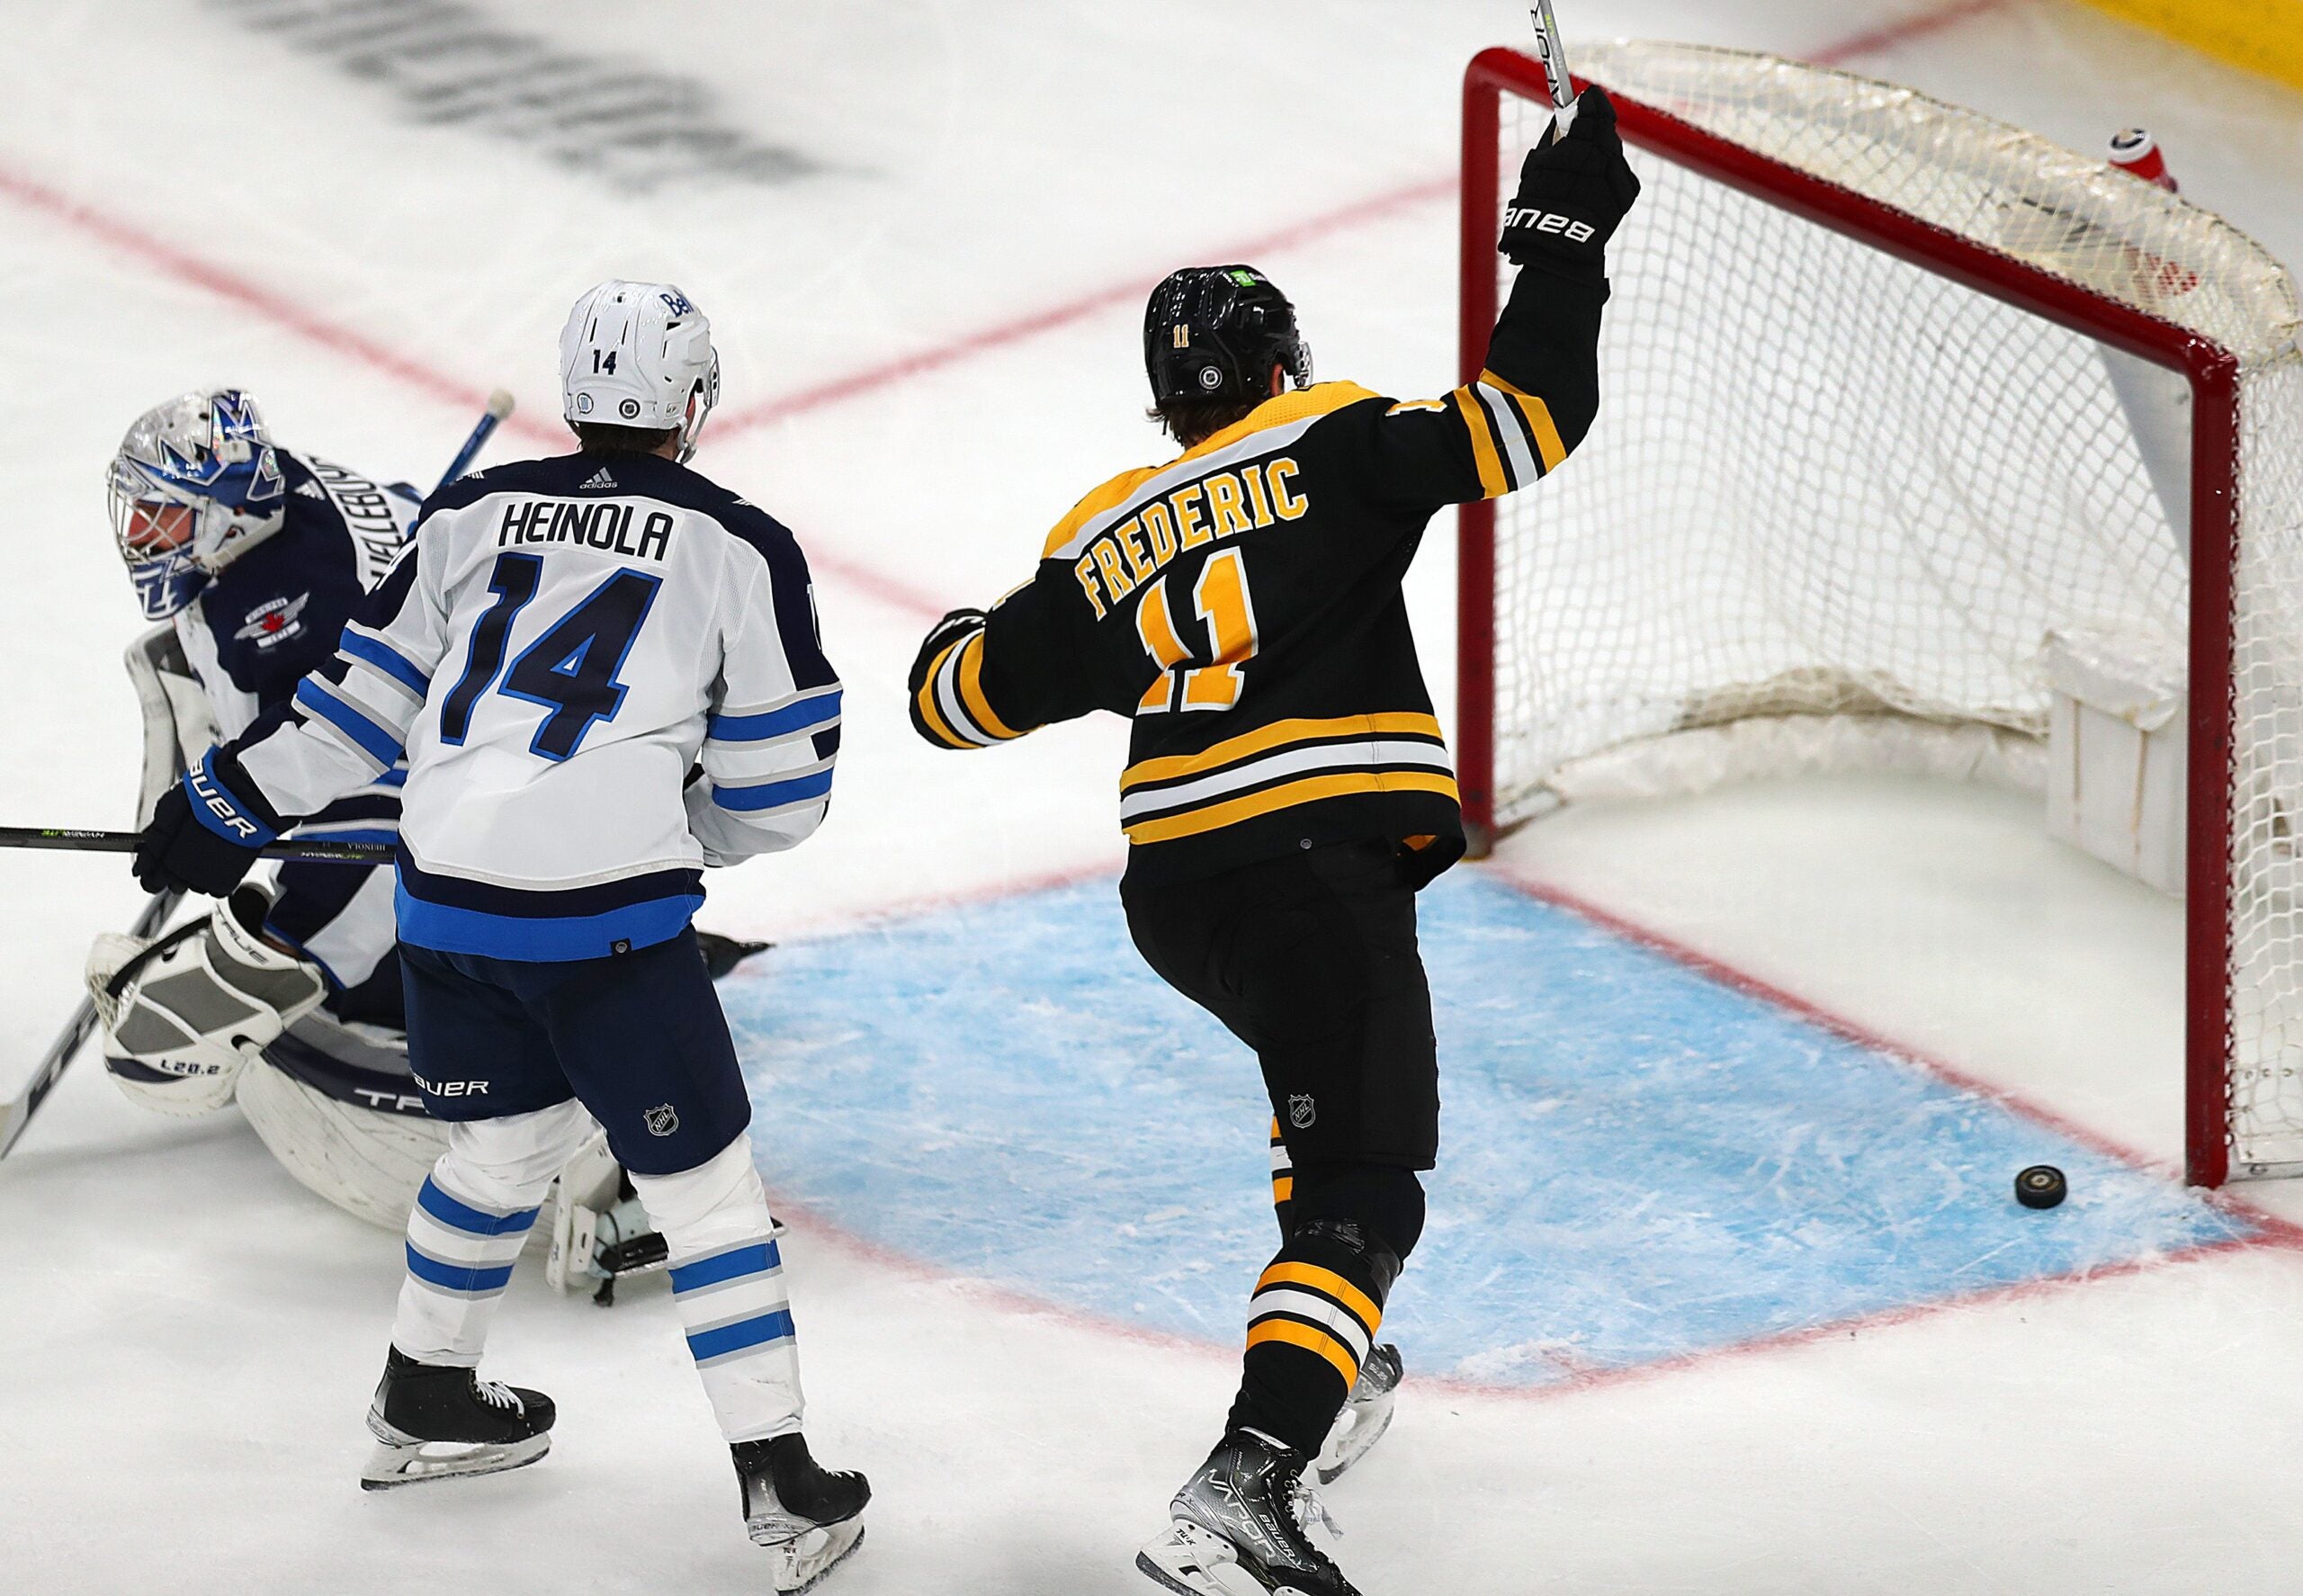 Bruins' A.J. greer only gets one game for a cross-check to the